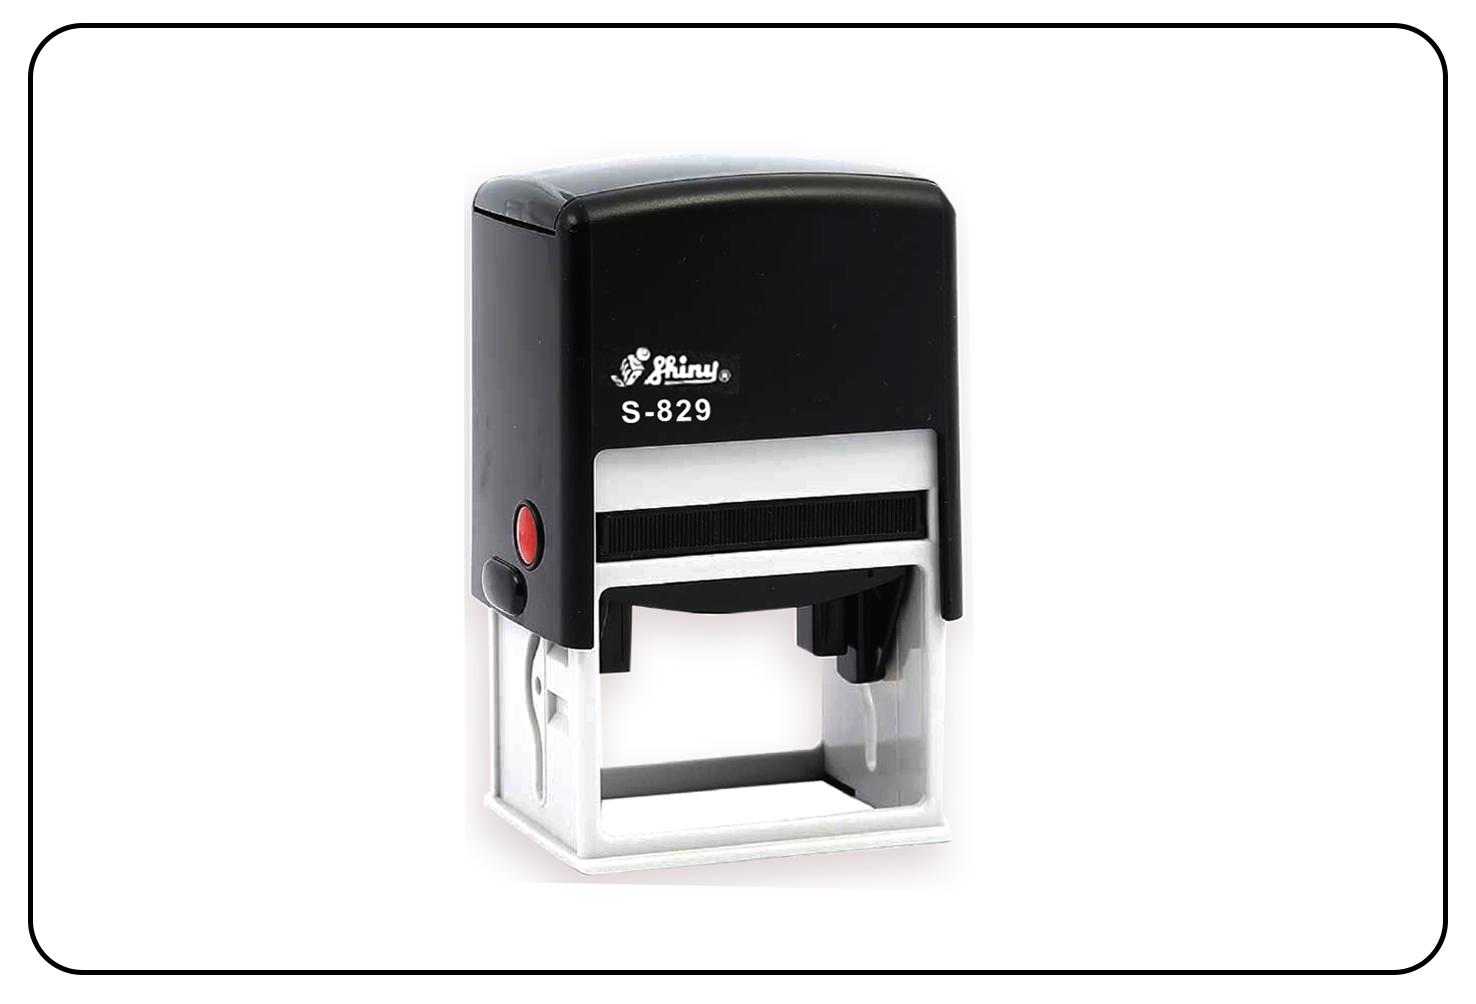 Square self-inking stamp producing clear and crisp impressions.